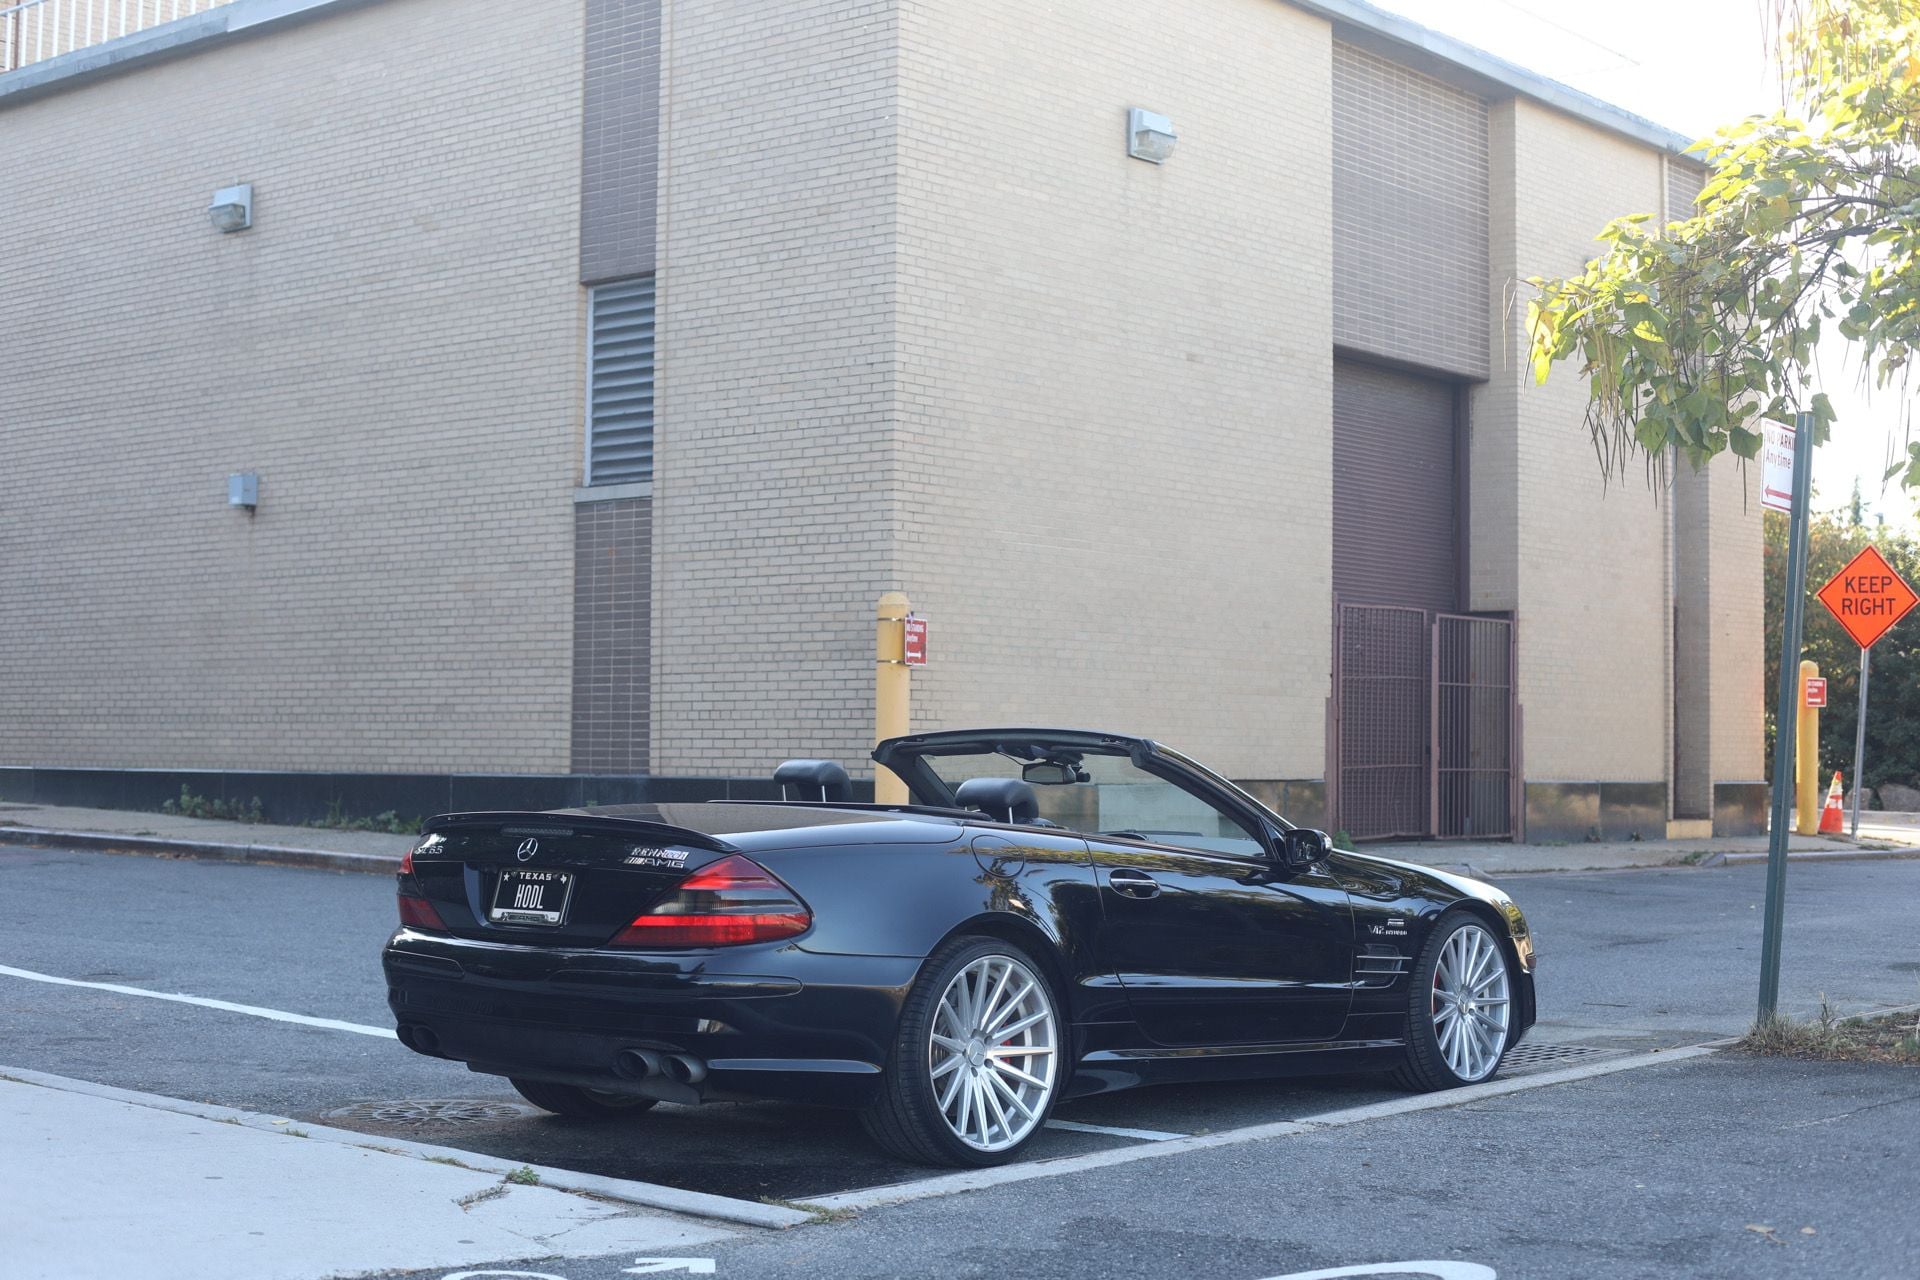 2005 Mercedes-Benz SL65 AMG - 2005 SL65 AMG - Used - VIN WDBSK79f95f095678 - 113,000 Miles - 12 cyl - 2WD - Automatic - Convertible - Black - Portsmouth, Nh, NH 03870, United States